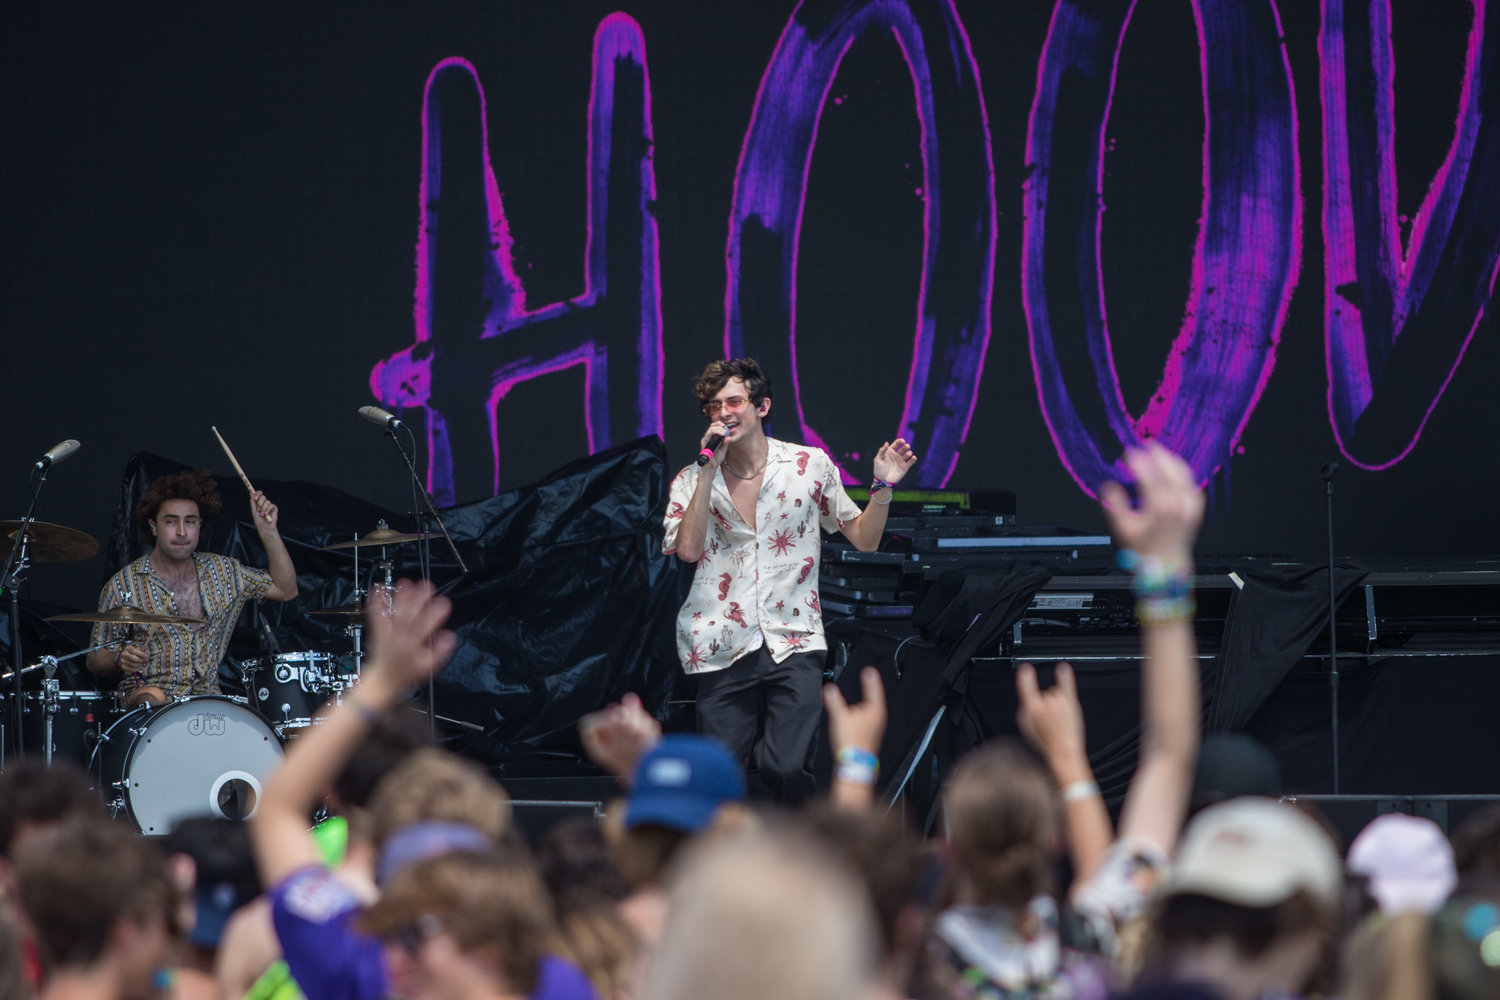 Zach Hood performs at Hangout Music Fest 2022 on Friday, May 20, in Gulf Shores.